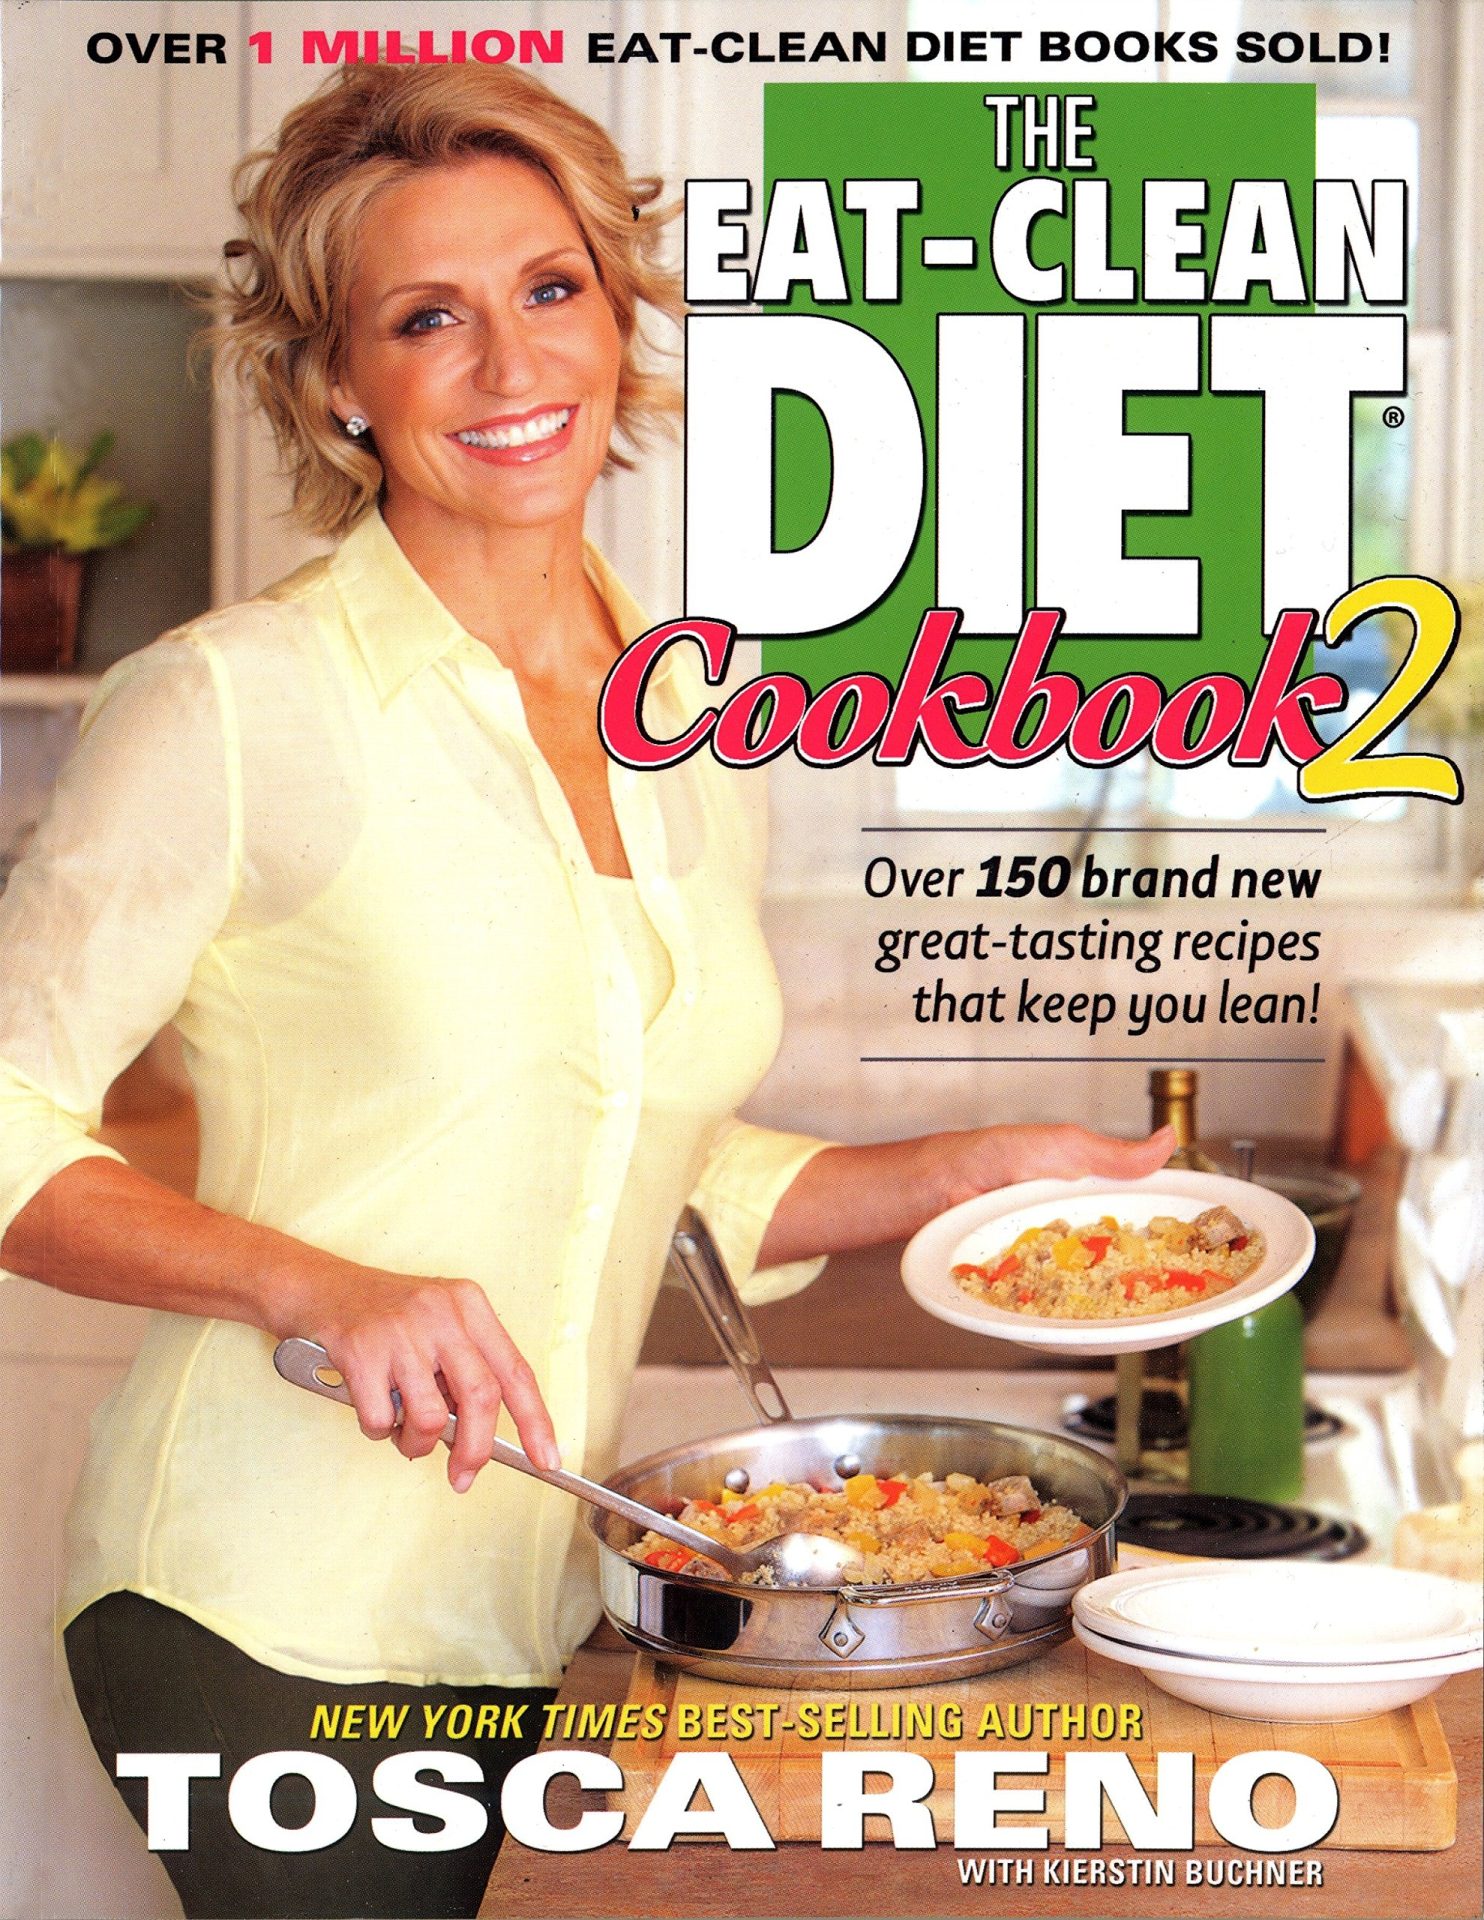 The Eat-Clean Diet Cookbook for Family & Kids